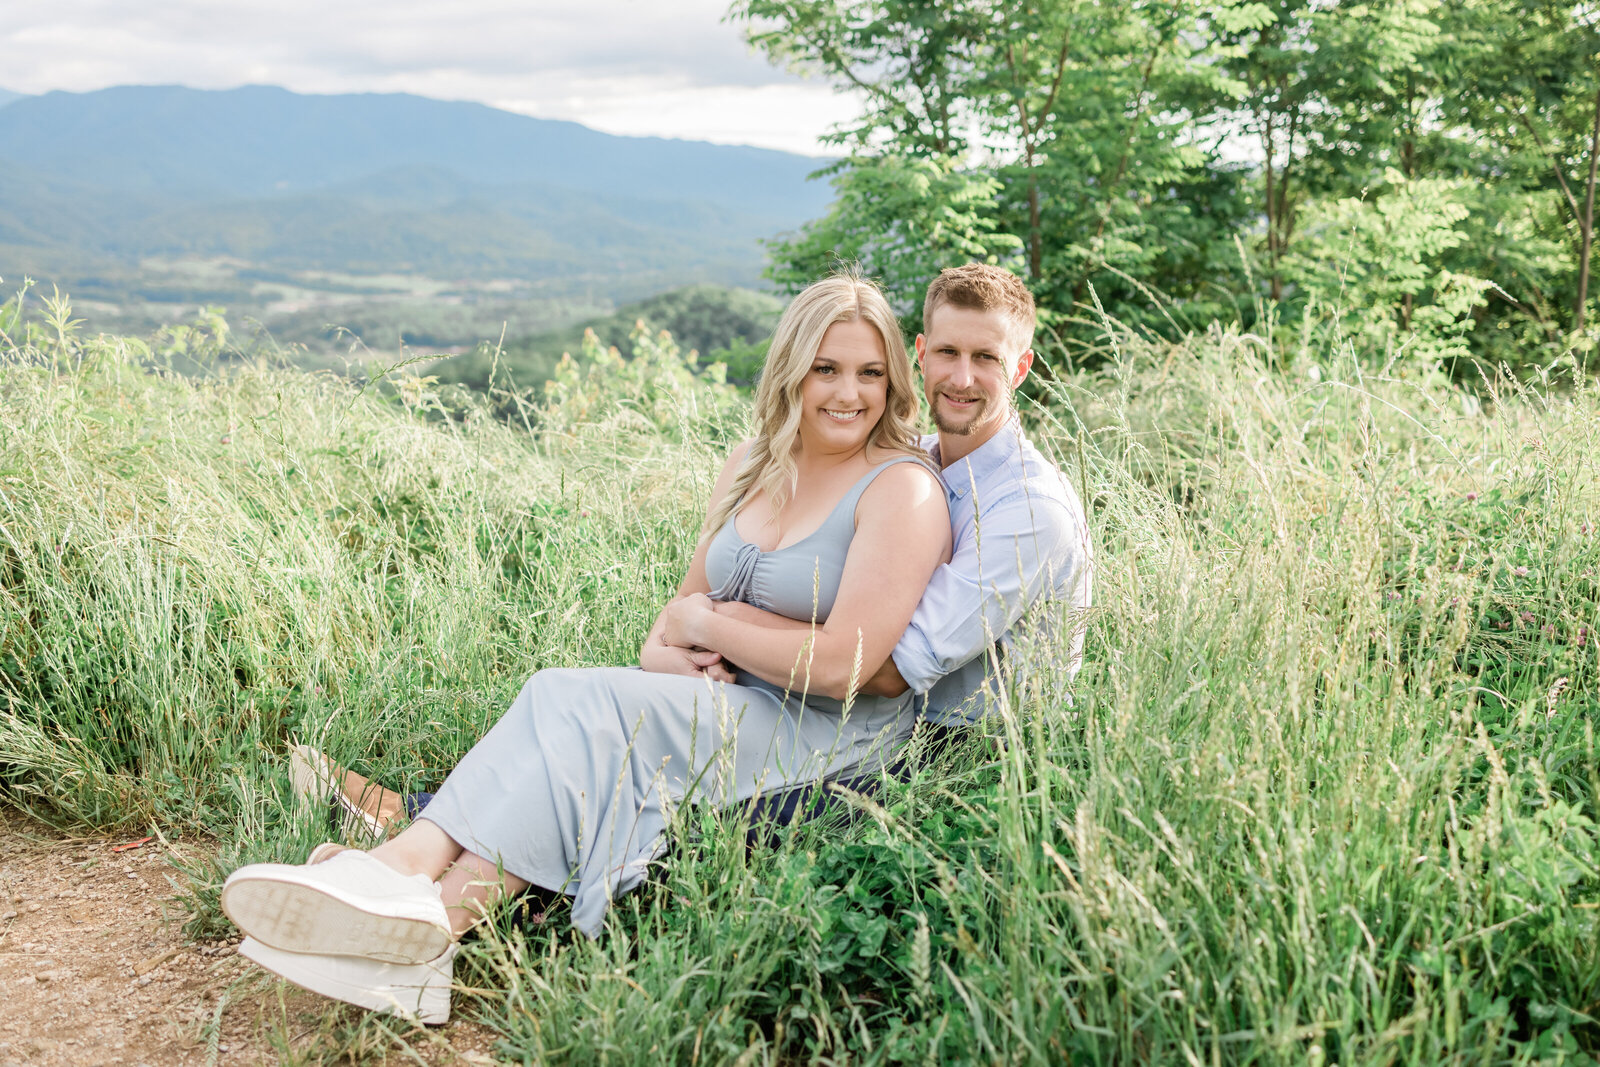 Foothills-Parkway-Anniversary-Couples-Session-Gatlinburg-Tennessee-Willow-And-Rove-25